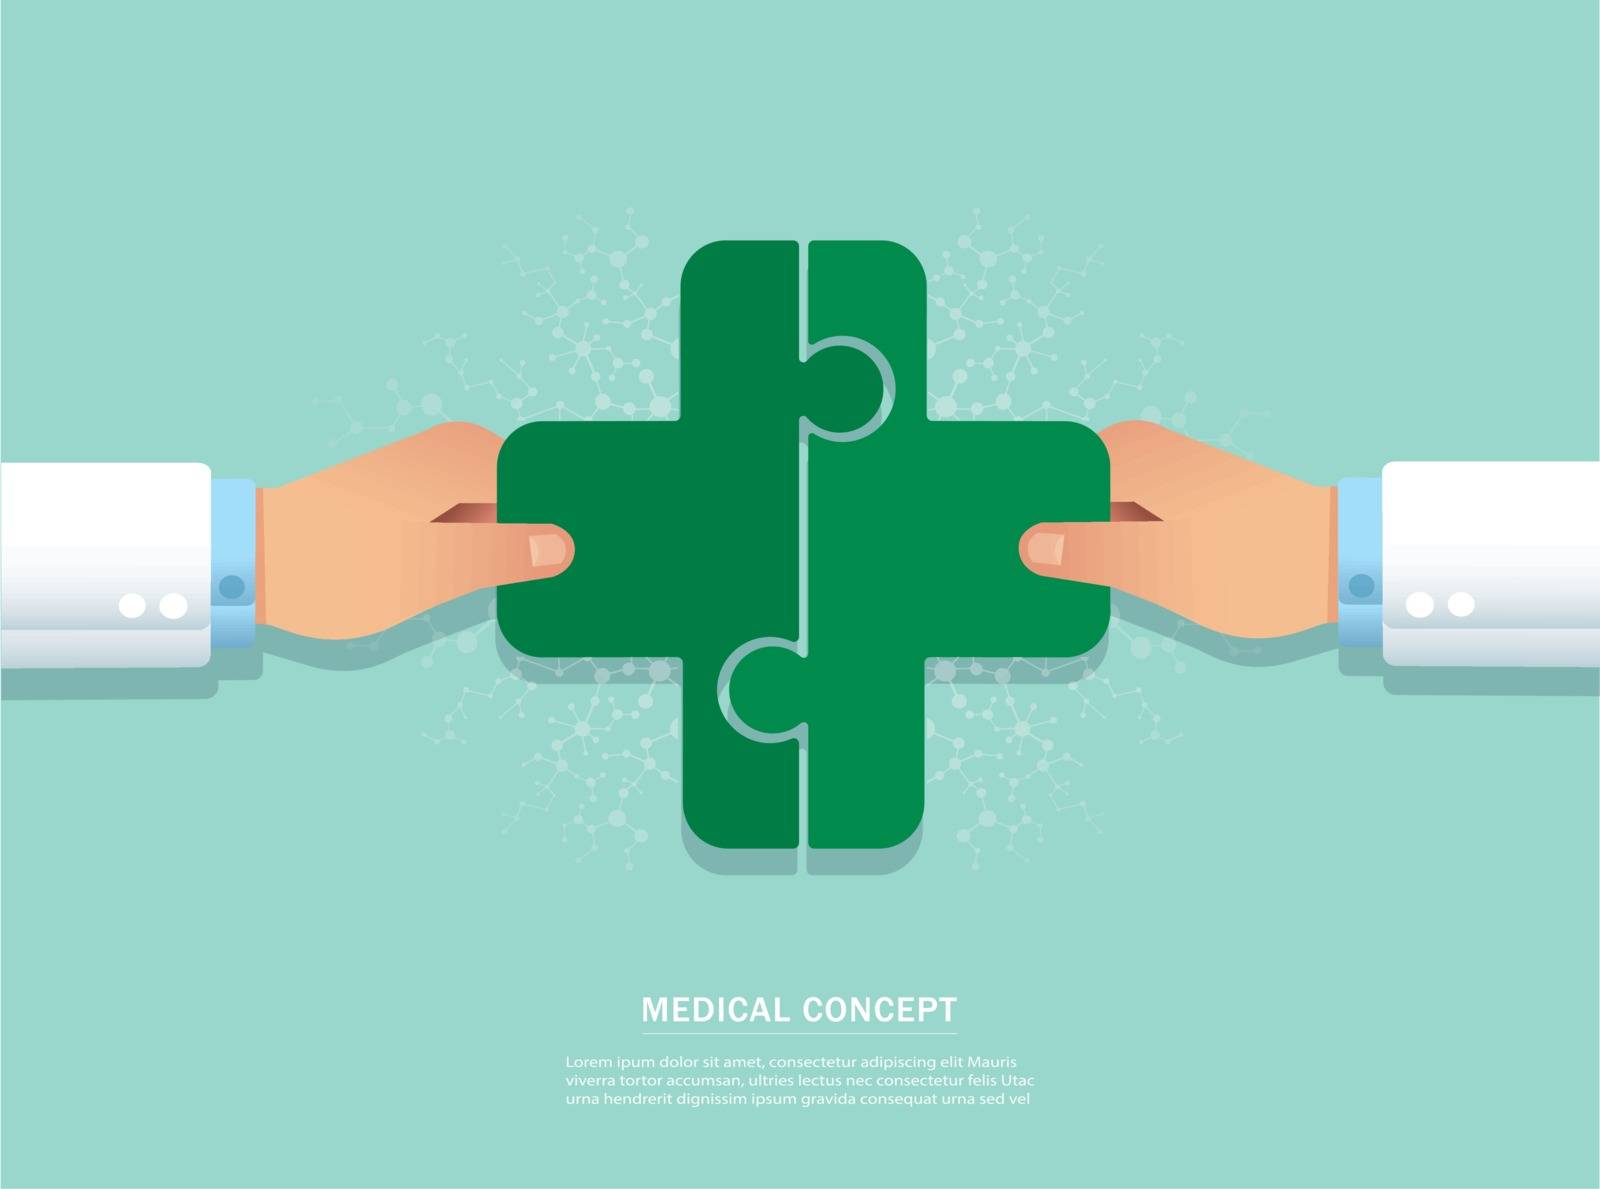 Teamwork concept. hand putting the puzzle madical icon together vector illustration EPS10 by h-santima